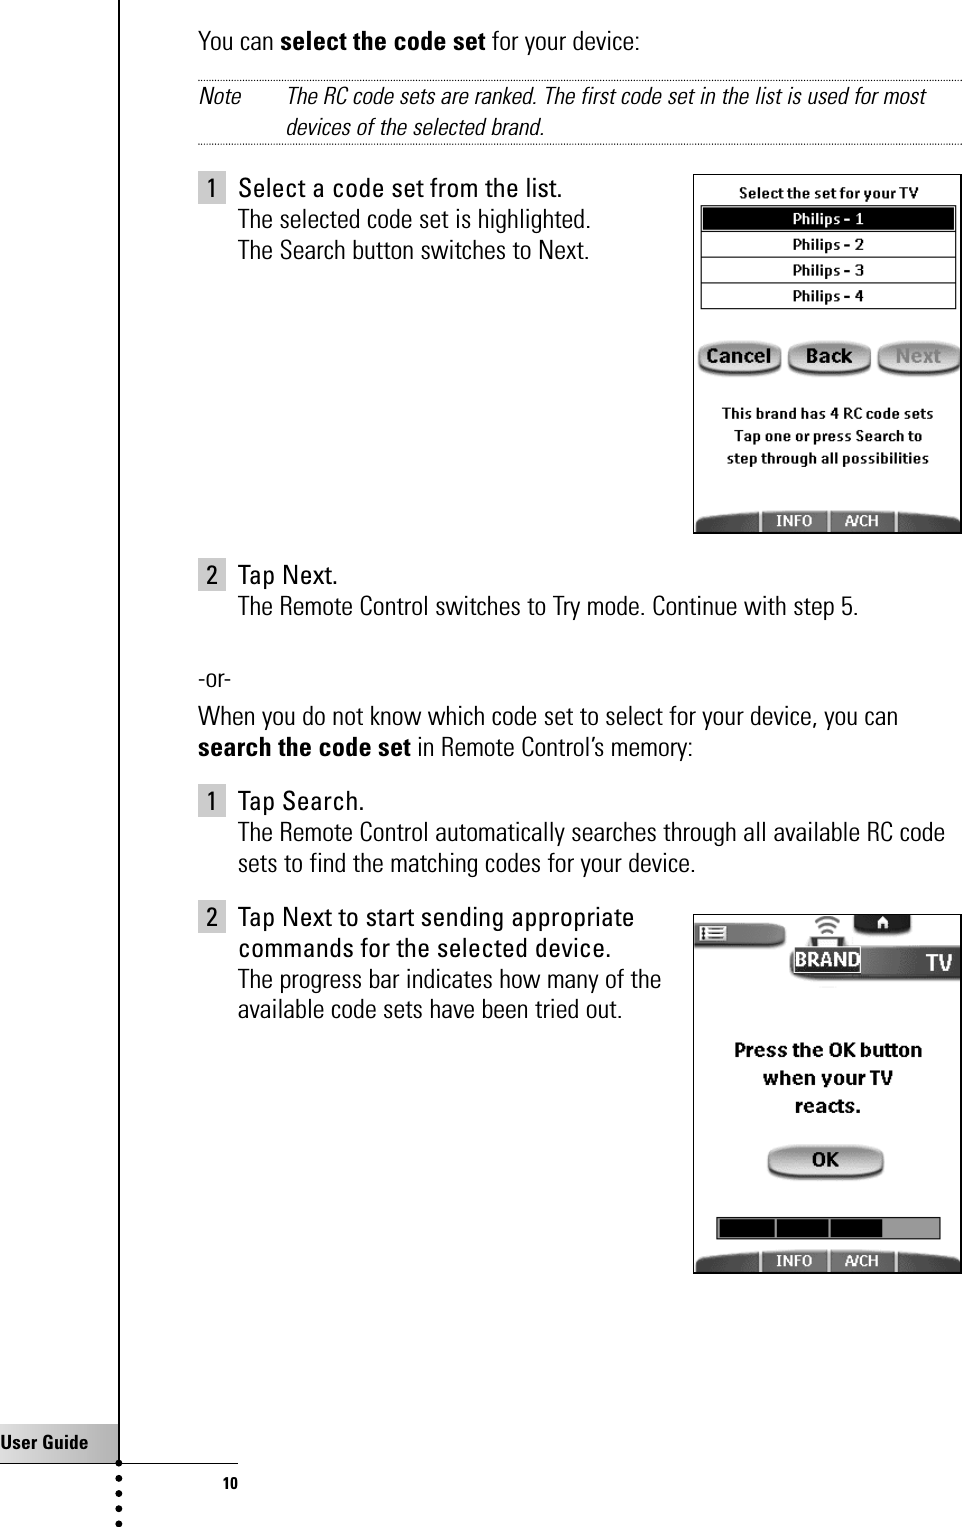 User Guide10You can select the code set for your device:Note The RC code sets are ranked. The first code set in the list is used for mostdevices of the selected brand.1 Select a code set from the list.The selected code set is highlighted. The Search button switches to Next.2 Tap Next.The Remote Control switches to Try mode. Continue with step 5.-or-When you do not know which code set to select for your device, you cansearch the code set in Remote Control’s memory:1 Tap Search.The Remote Control automatically searches through all available RC codesets to find the matching codes for your device.2 Tap Next to start sending appropriate commands for the selected device.The progress bar indicates how many of the available code sets have been tried out.Getting Started